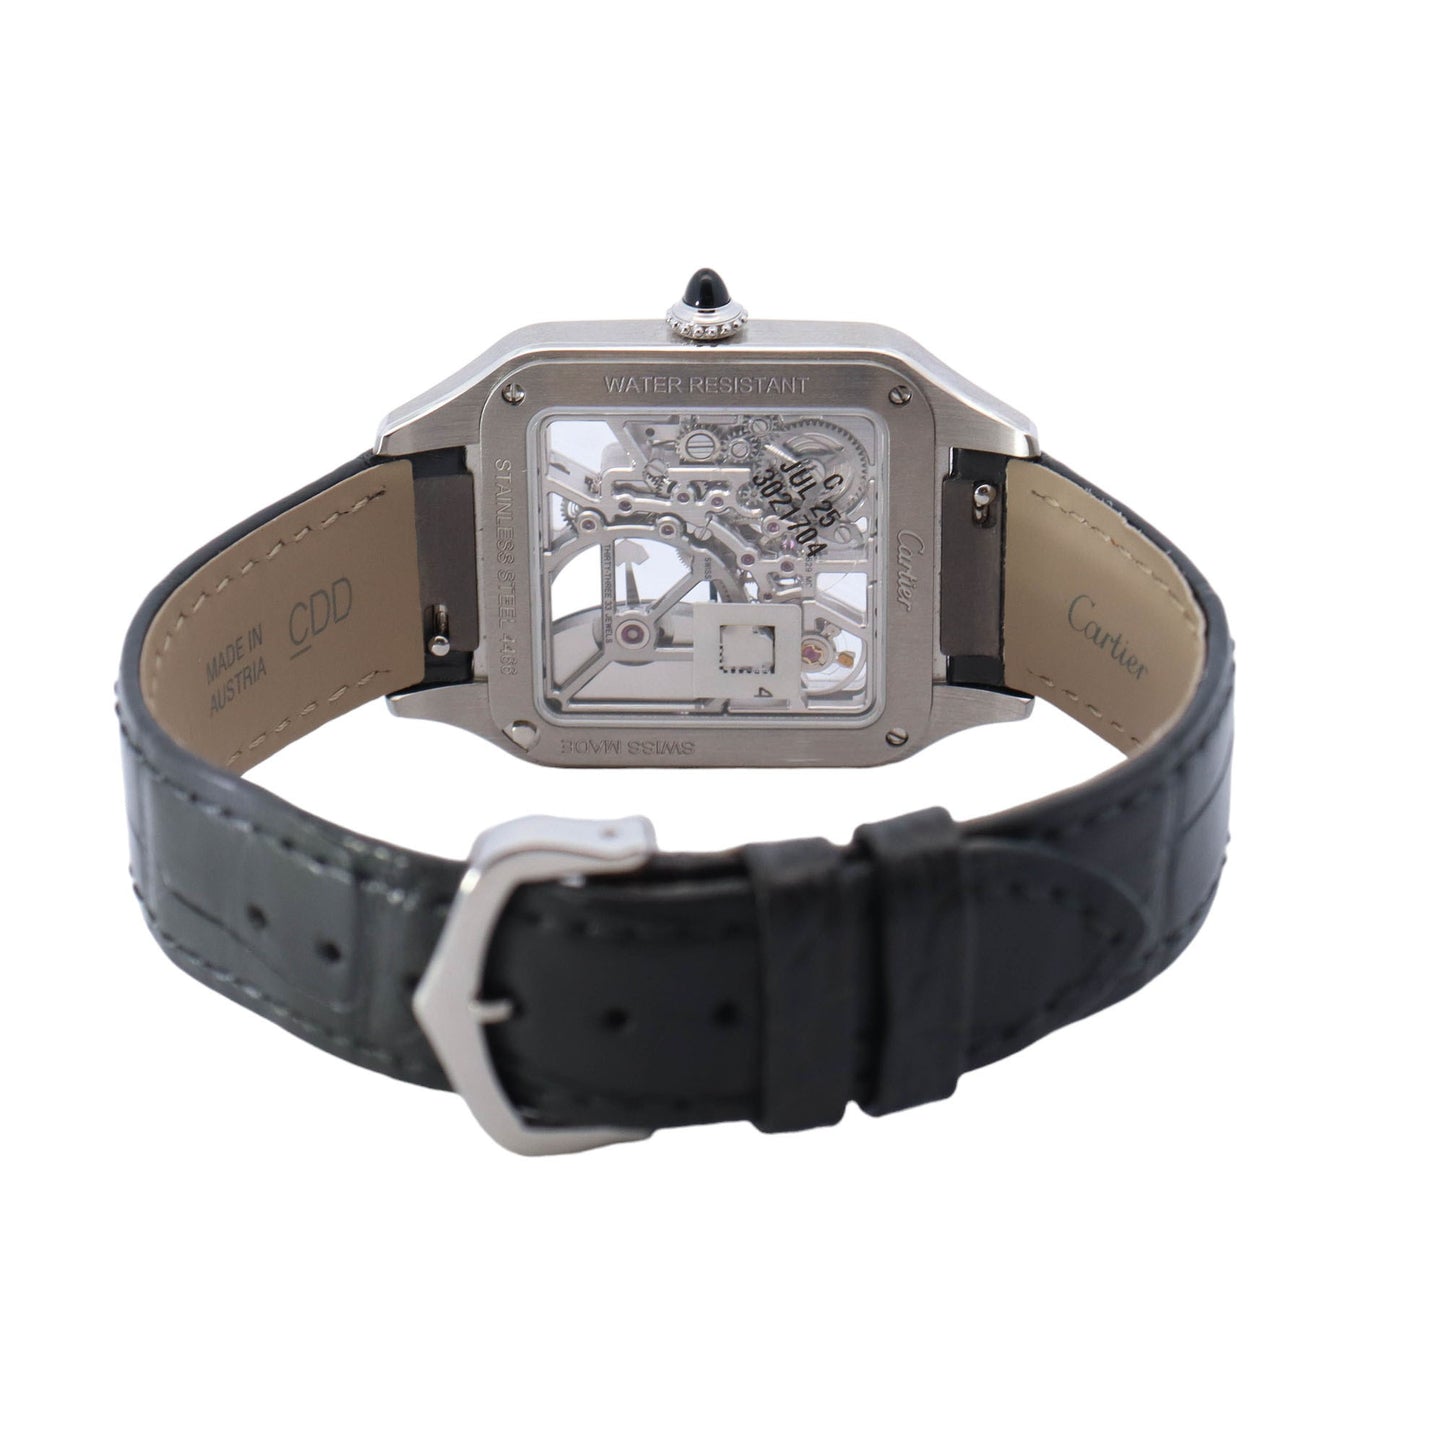 Cartier Santos Dumont Skeleton Stainless Steel Large Model 31mm Skeleton Dial Watch Reference #: WHSA0032 - Happy Jewelers Fine Jewelry Lifetime Warranty